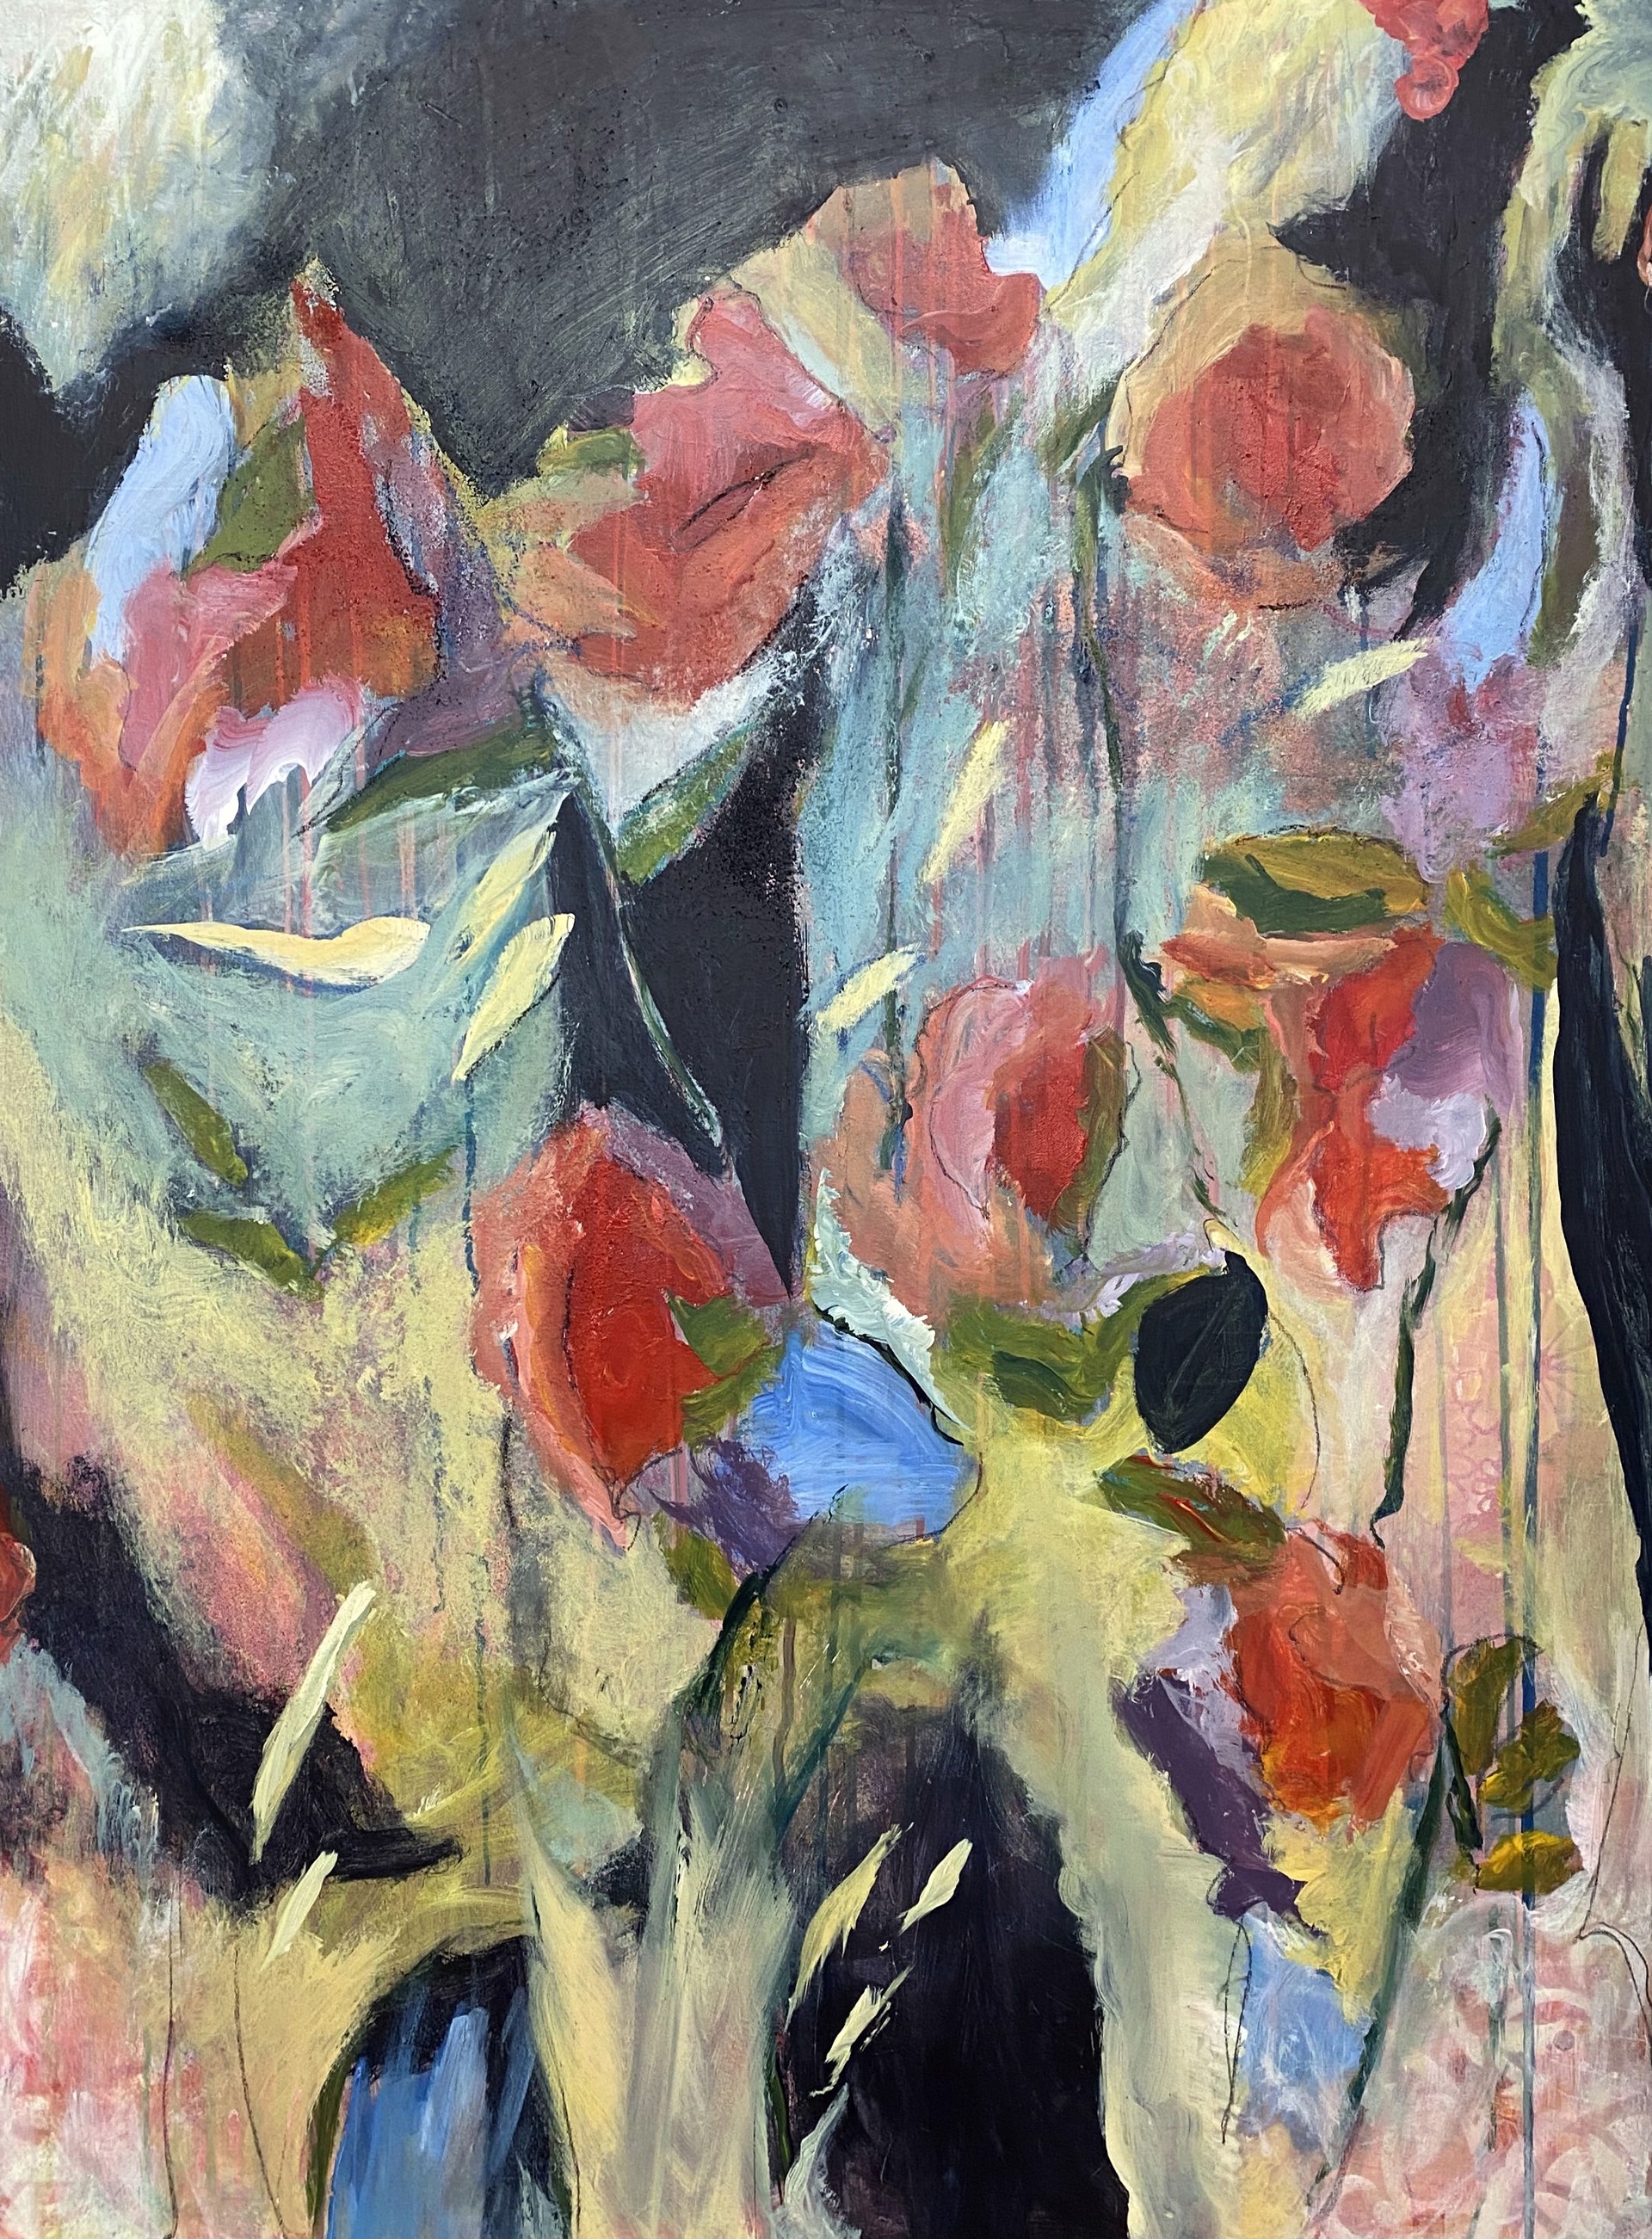 "Poppies" by Judie Jacobs